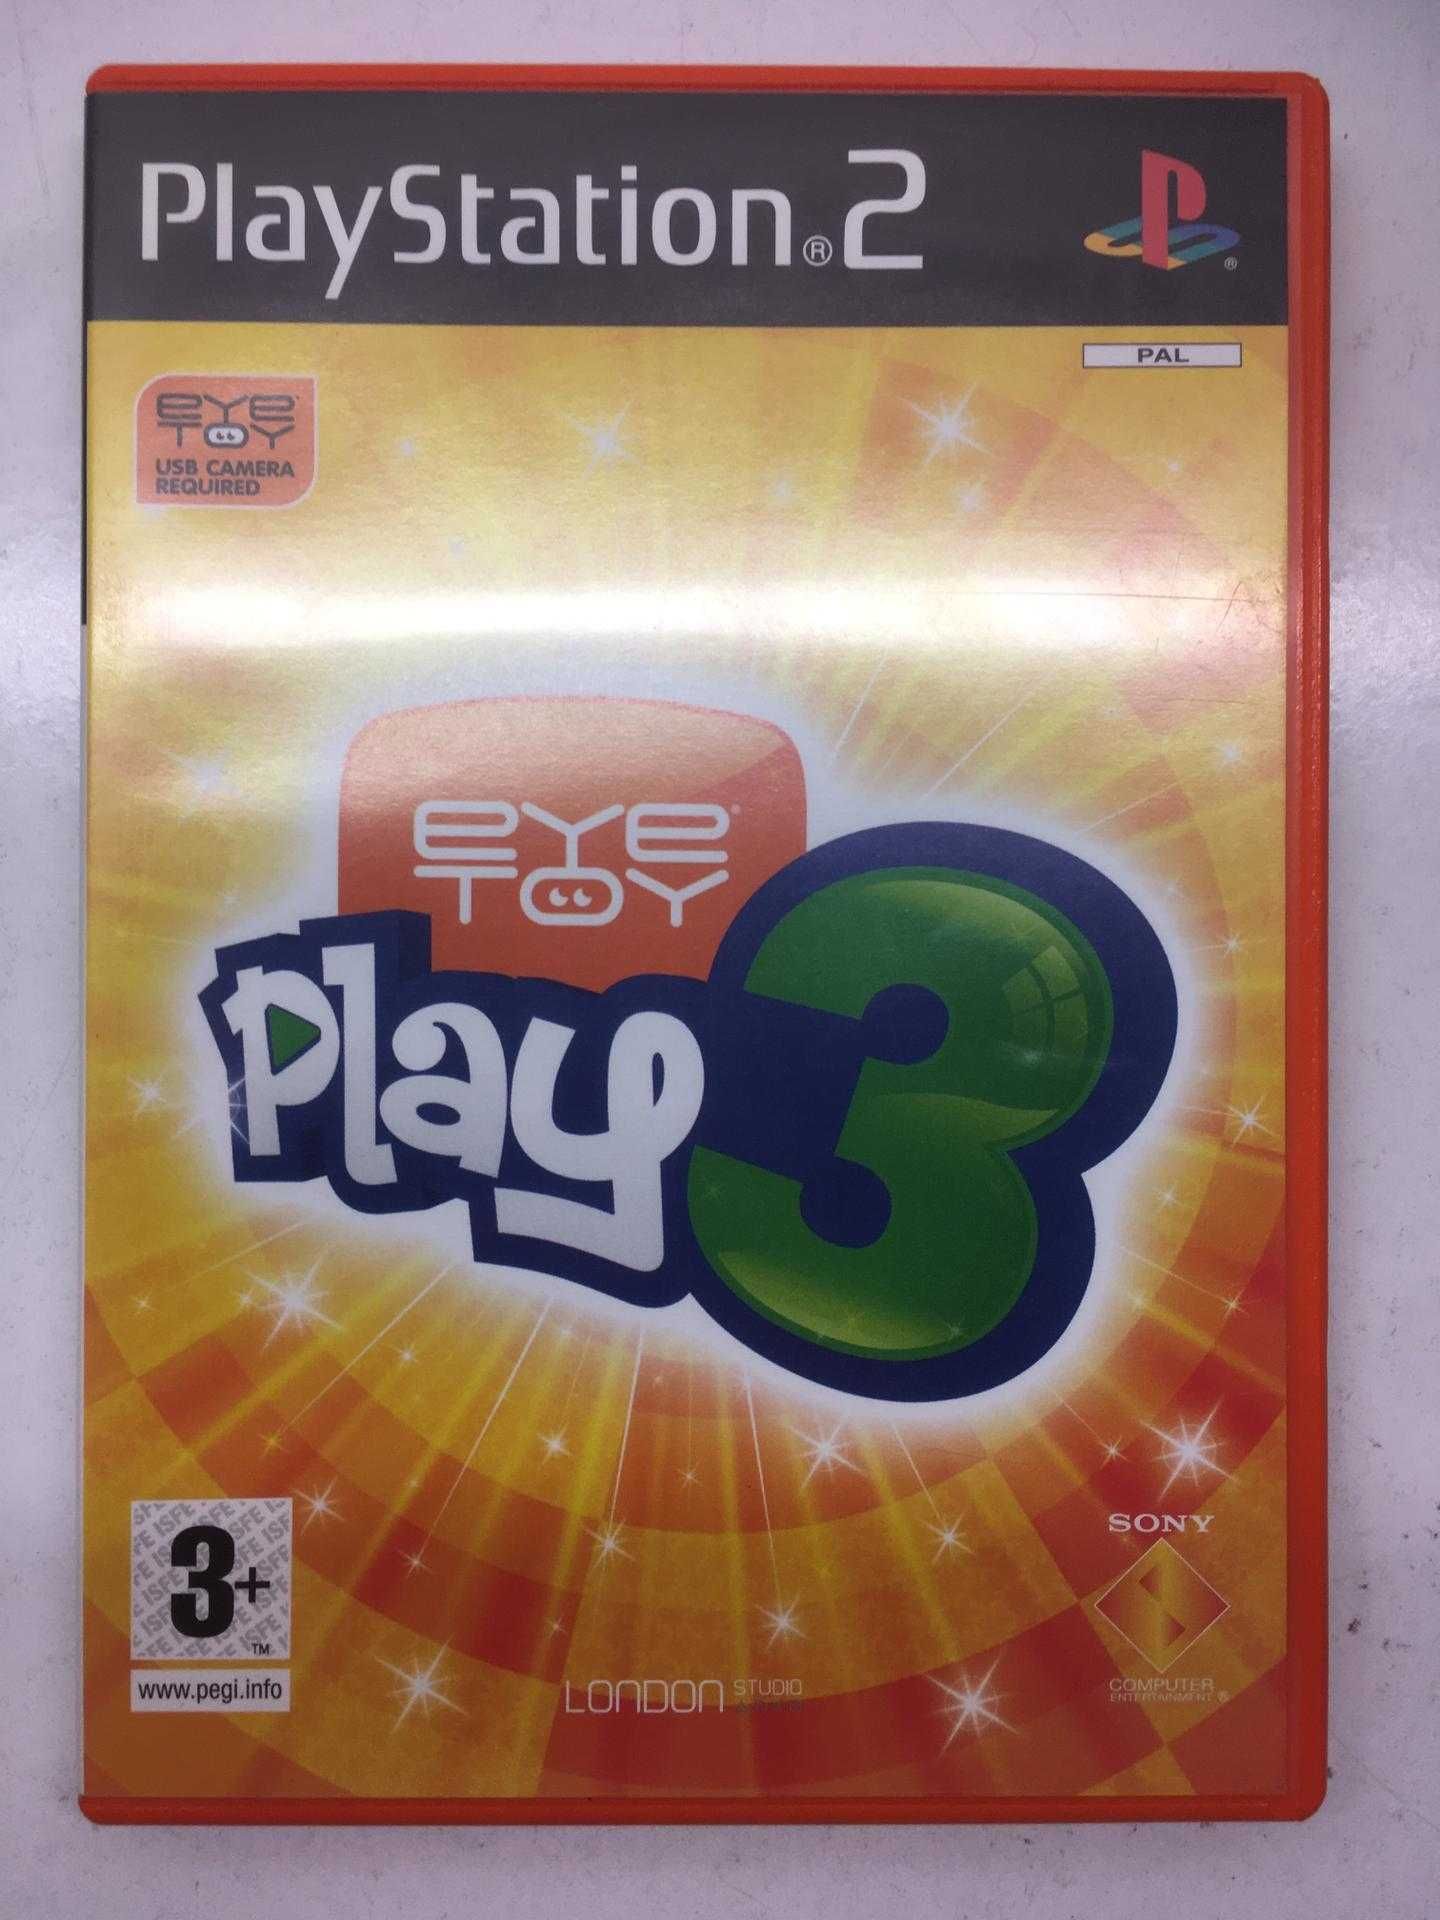 PS2 - Eye Toy Play 3